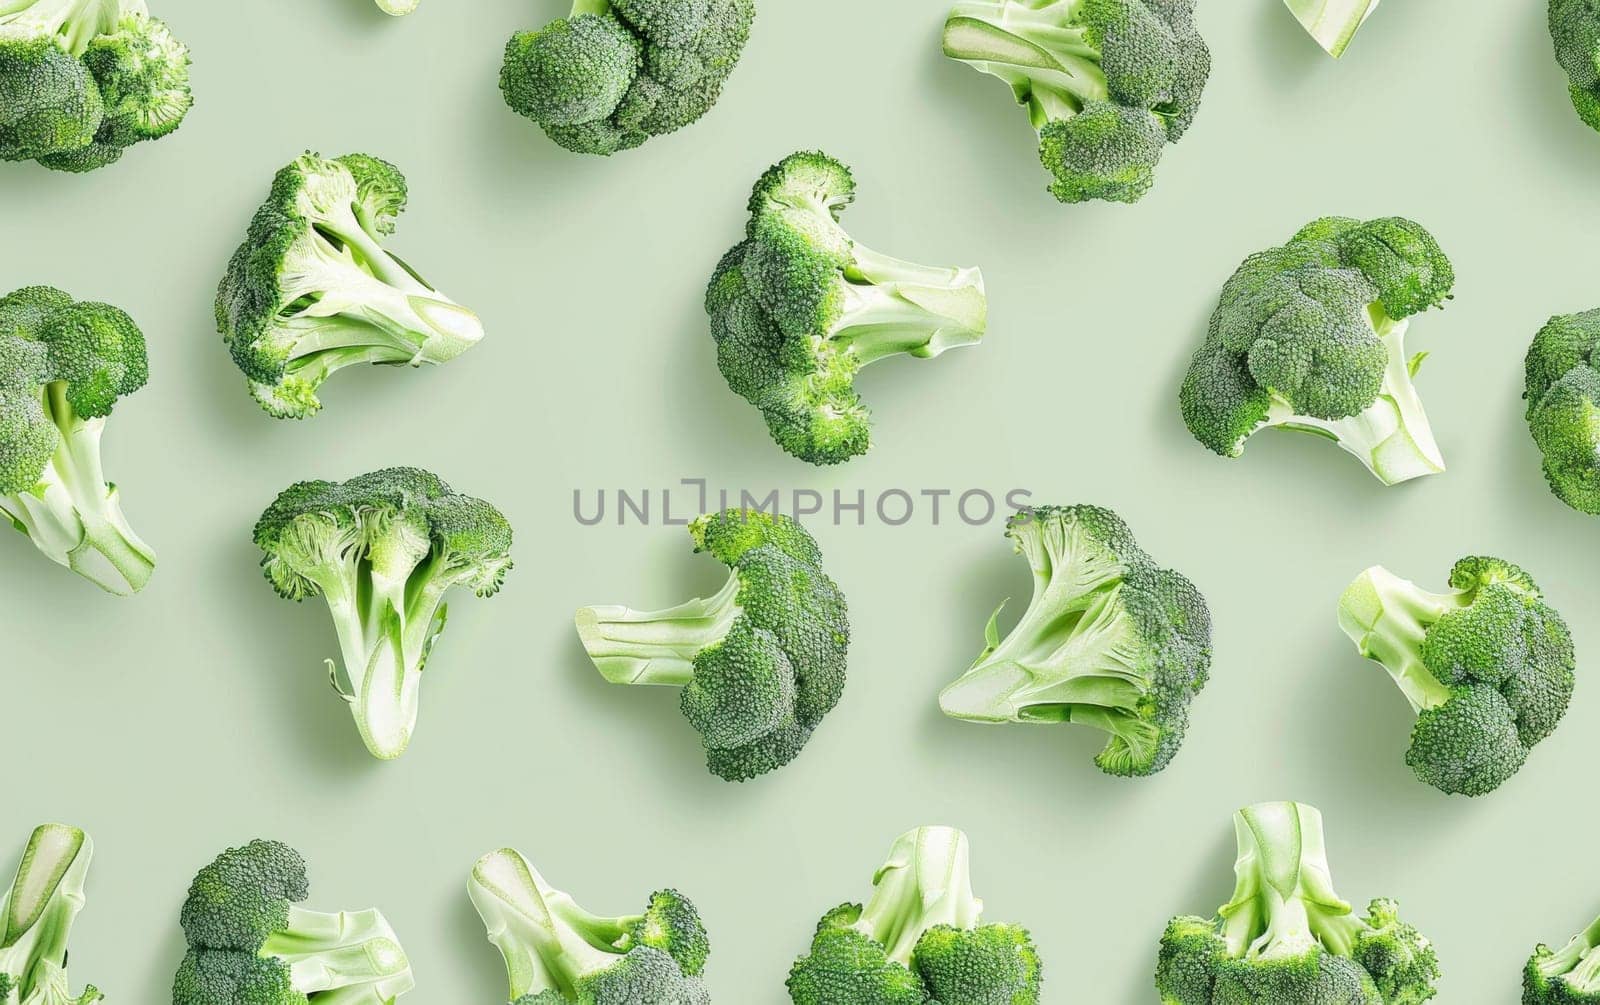 Pattern of green broccoli pieces on light green tablecloth for healthy eating and nutrition concept